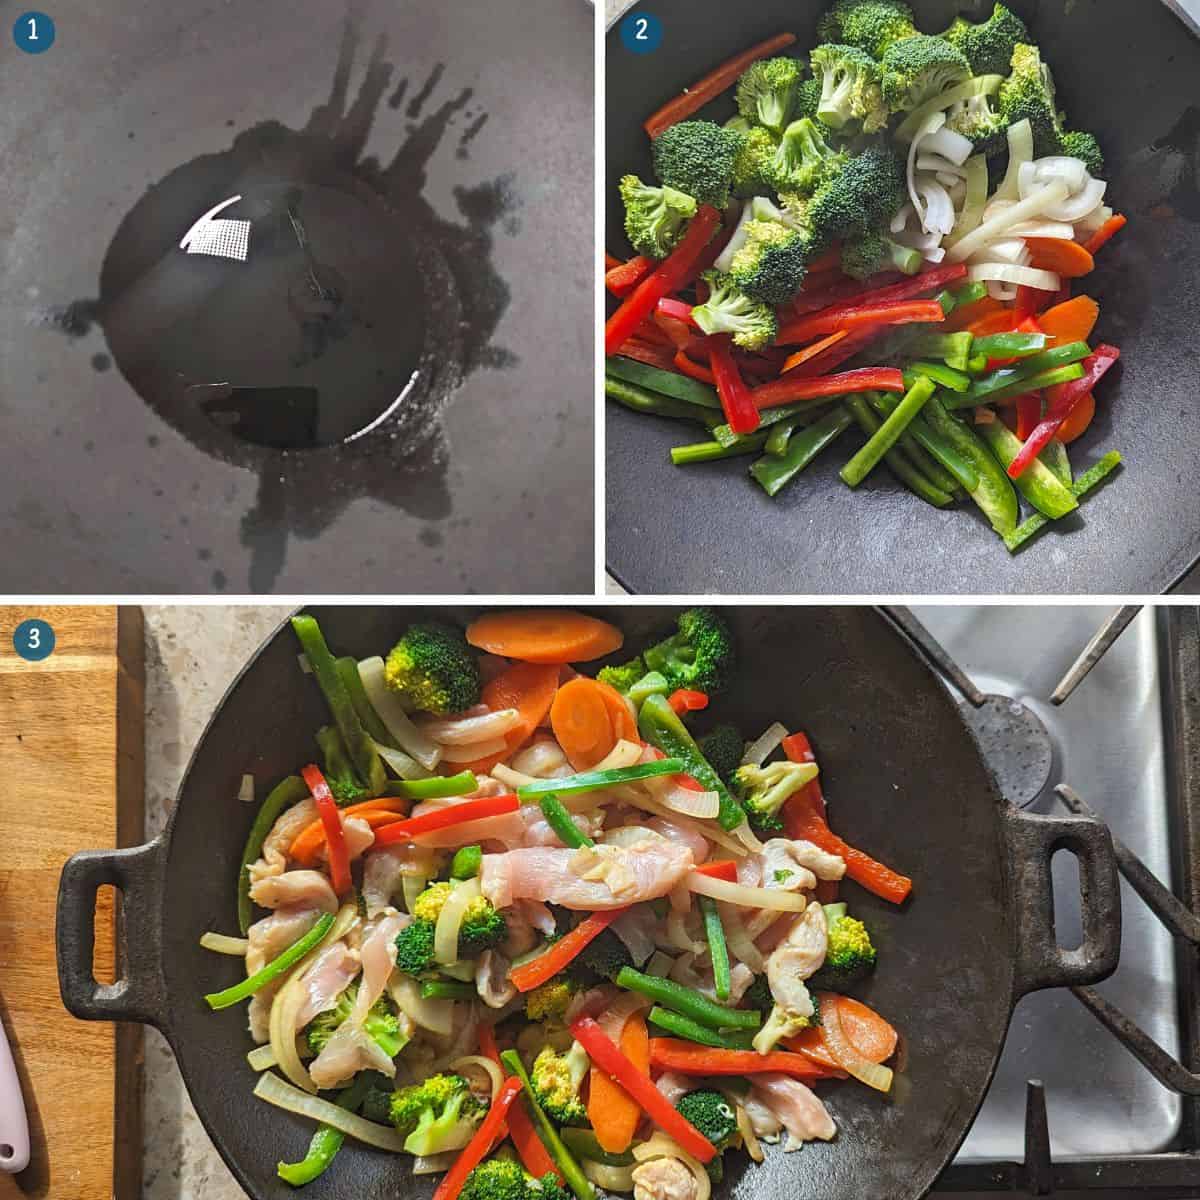 Stir-frying the vegetables for Chinese chicken and vegetables